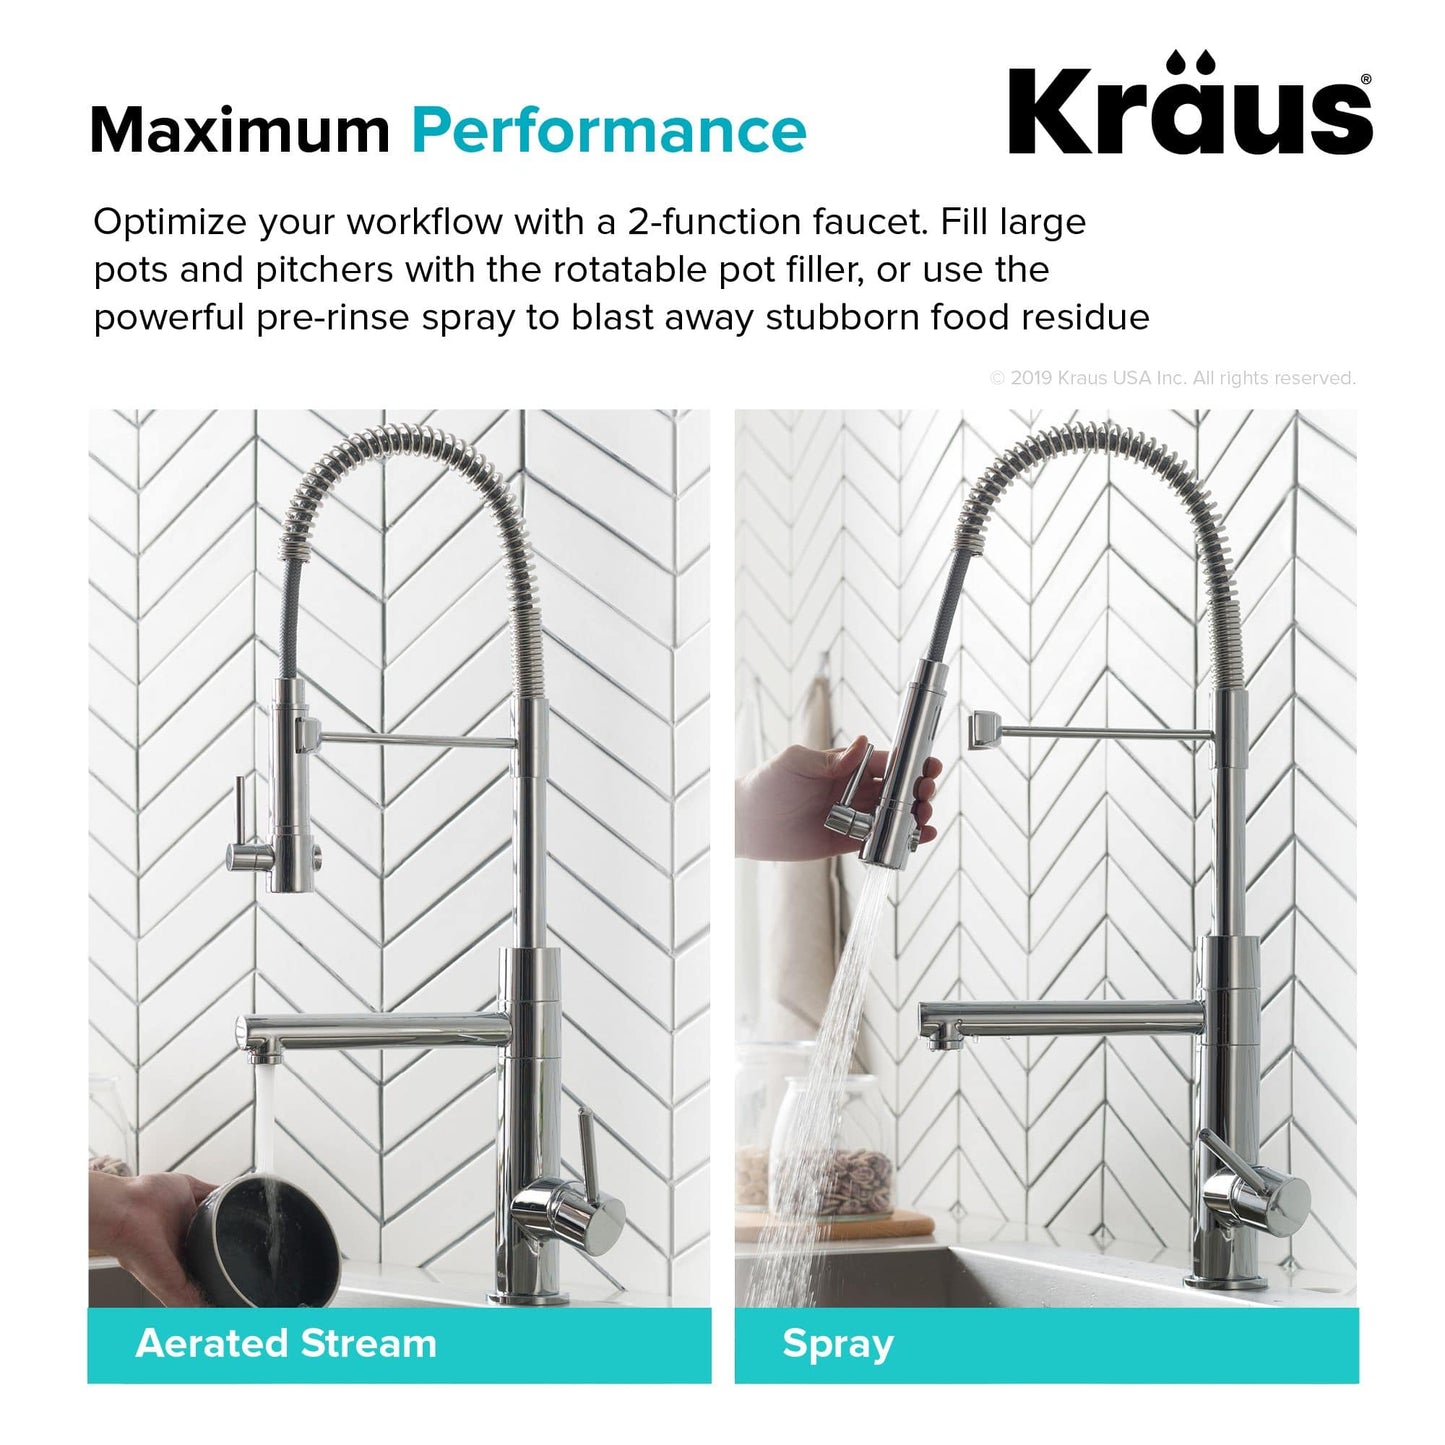 Kraus Artec 24.75" Pro Commercial Style Pre-Rinse Kitchen Faucet in Brushed Gold